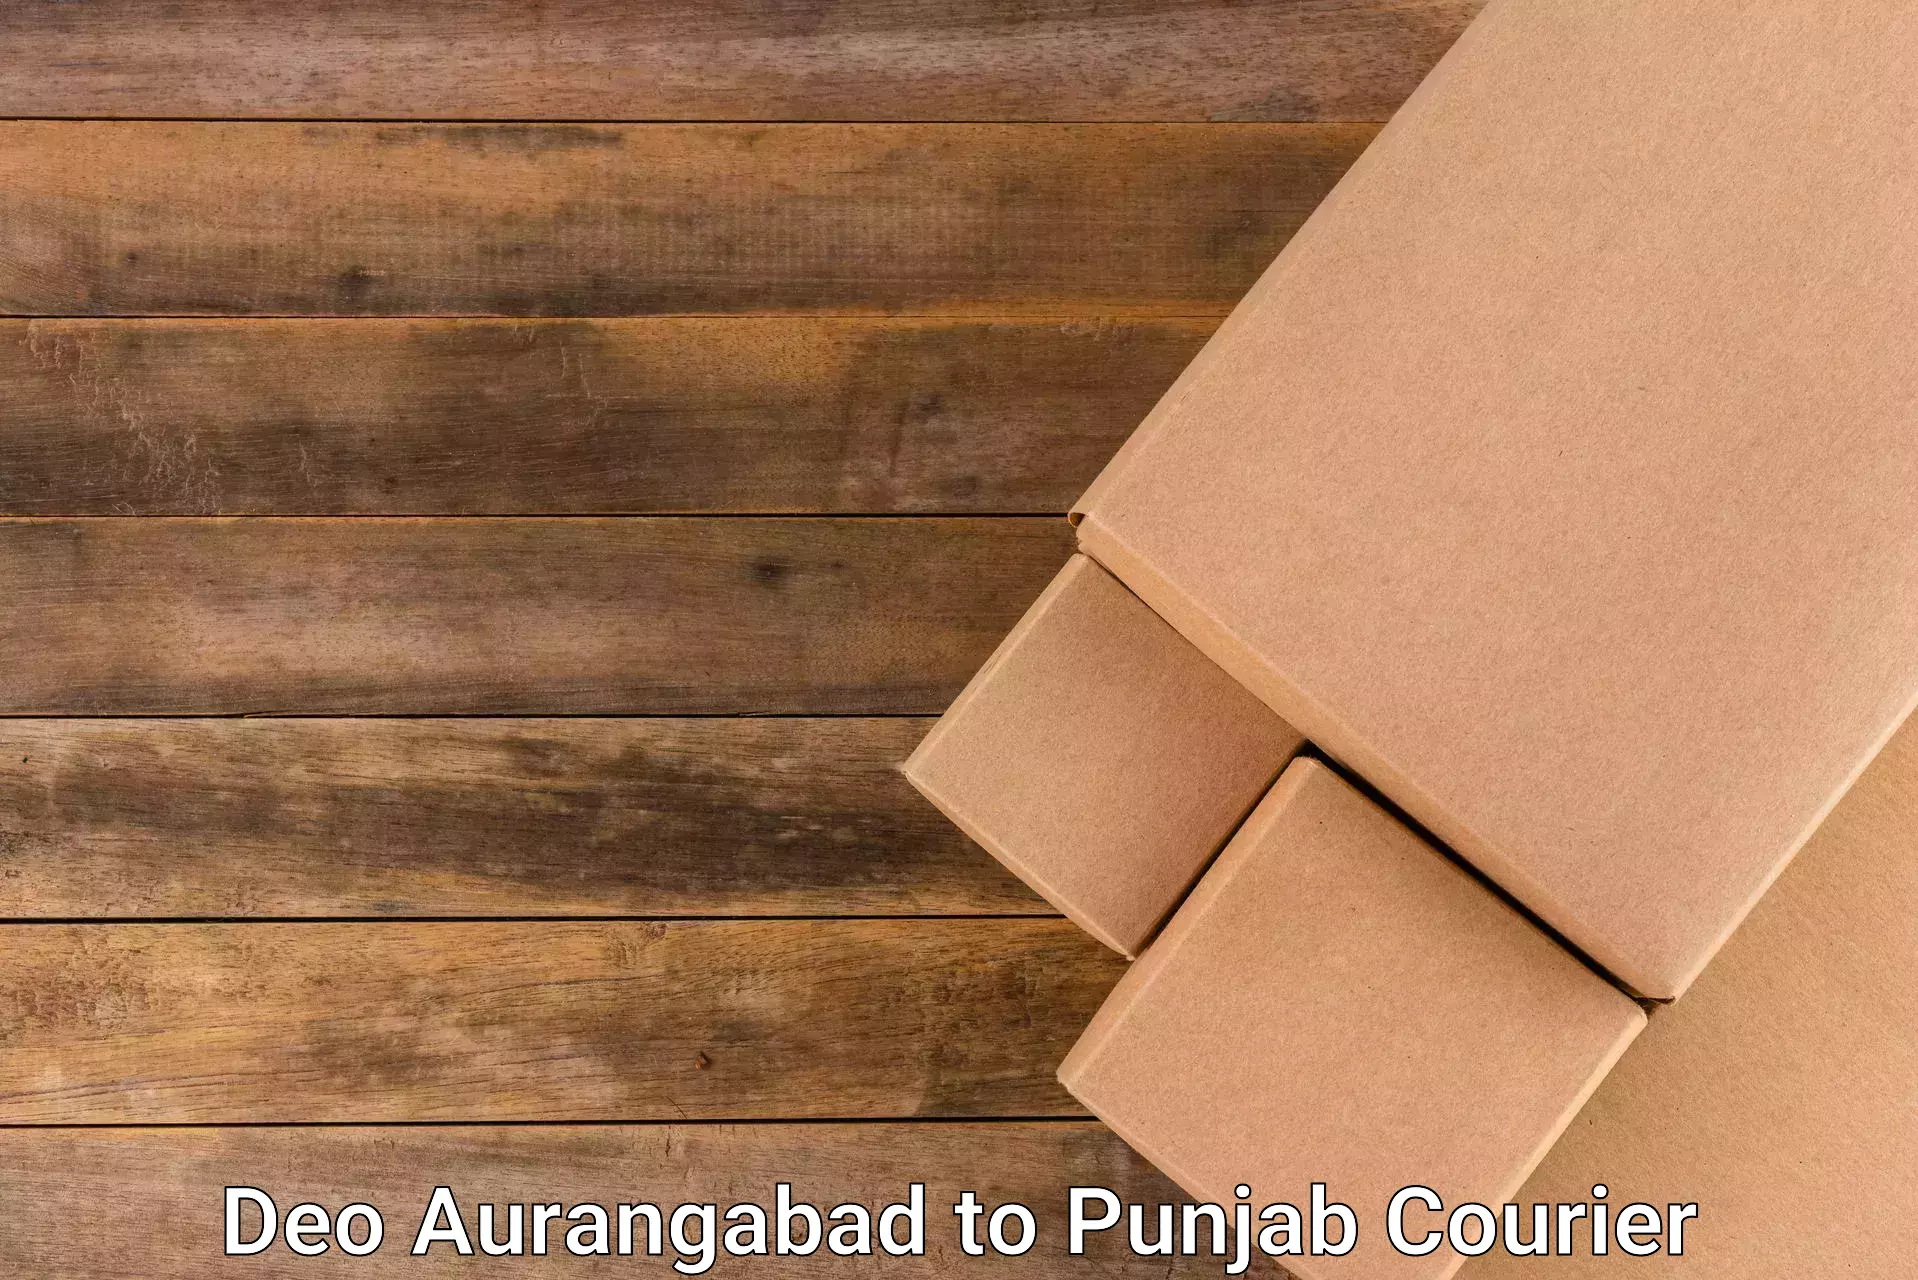 Large-scale shipping solutions Deo Aurangabad to Sangrur